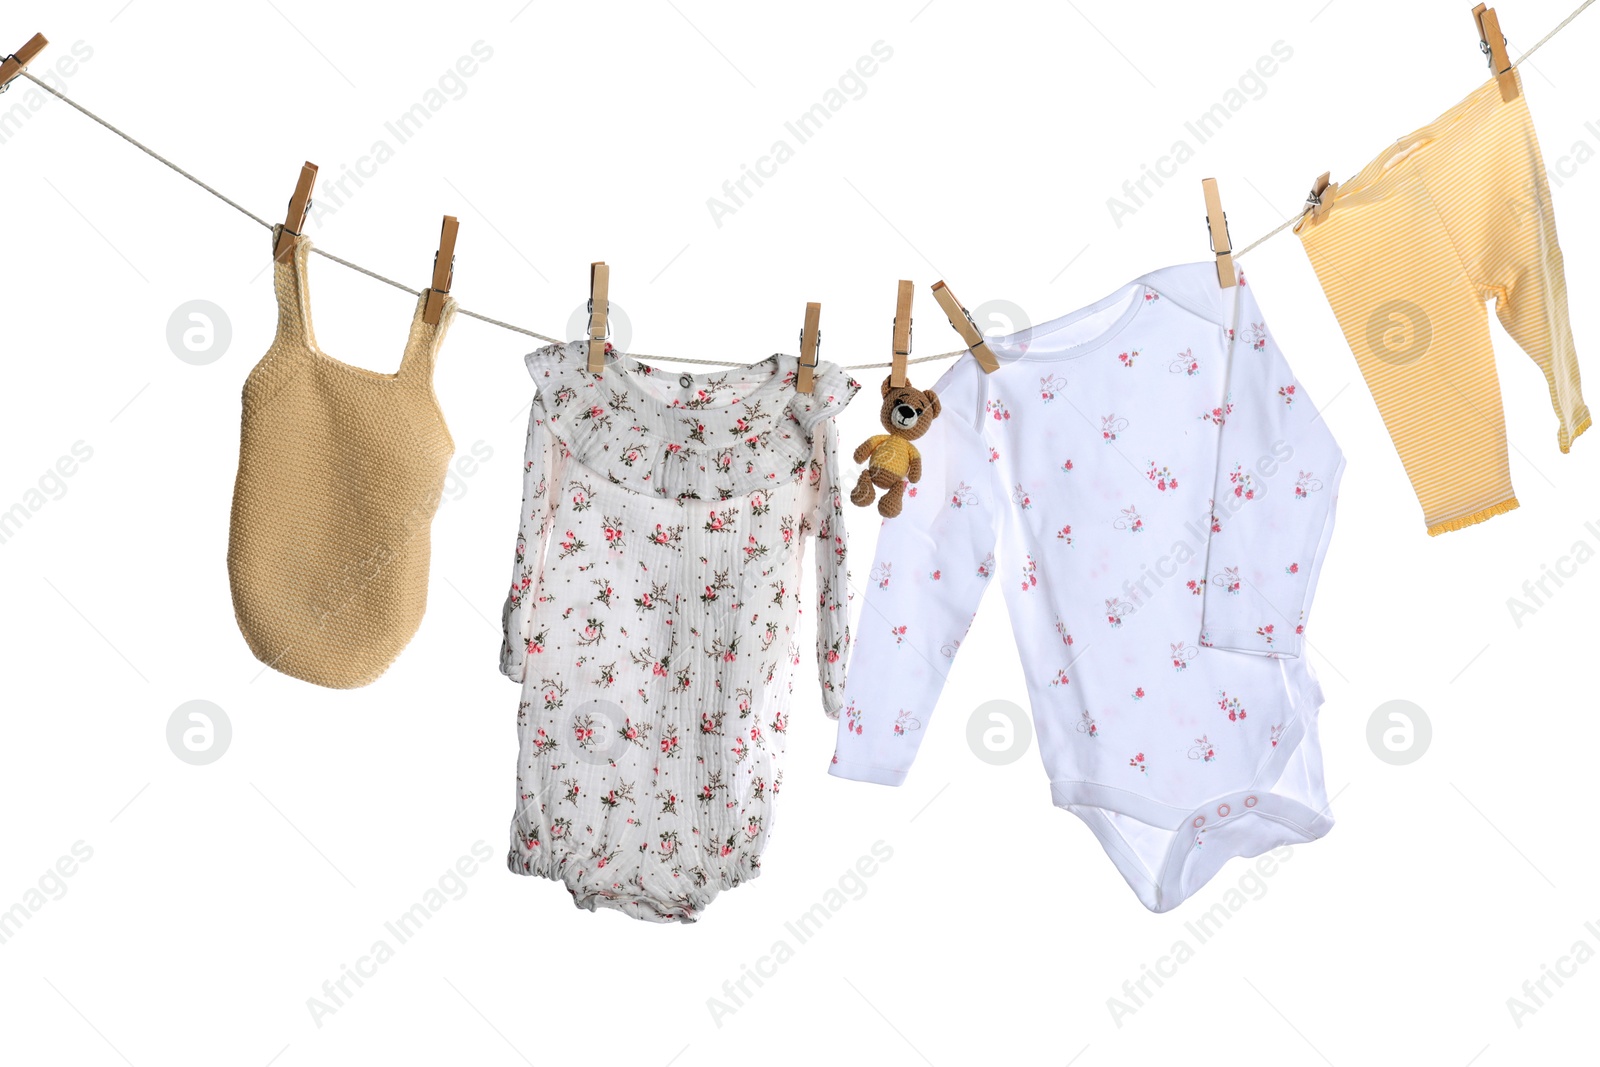 Photo of Different baby clothes and bear toy drying on laundry line against white background